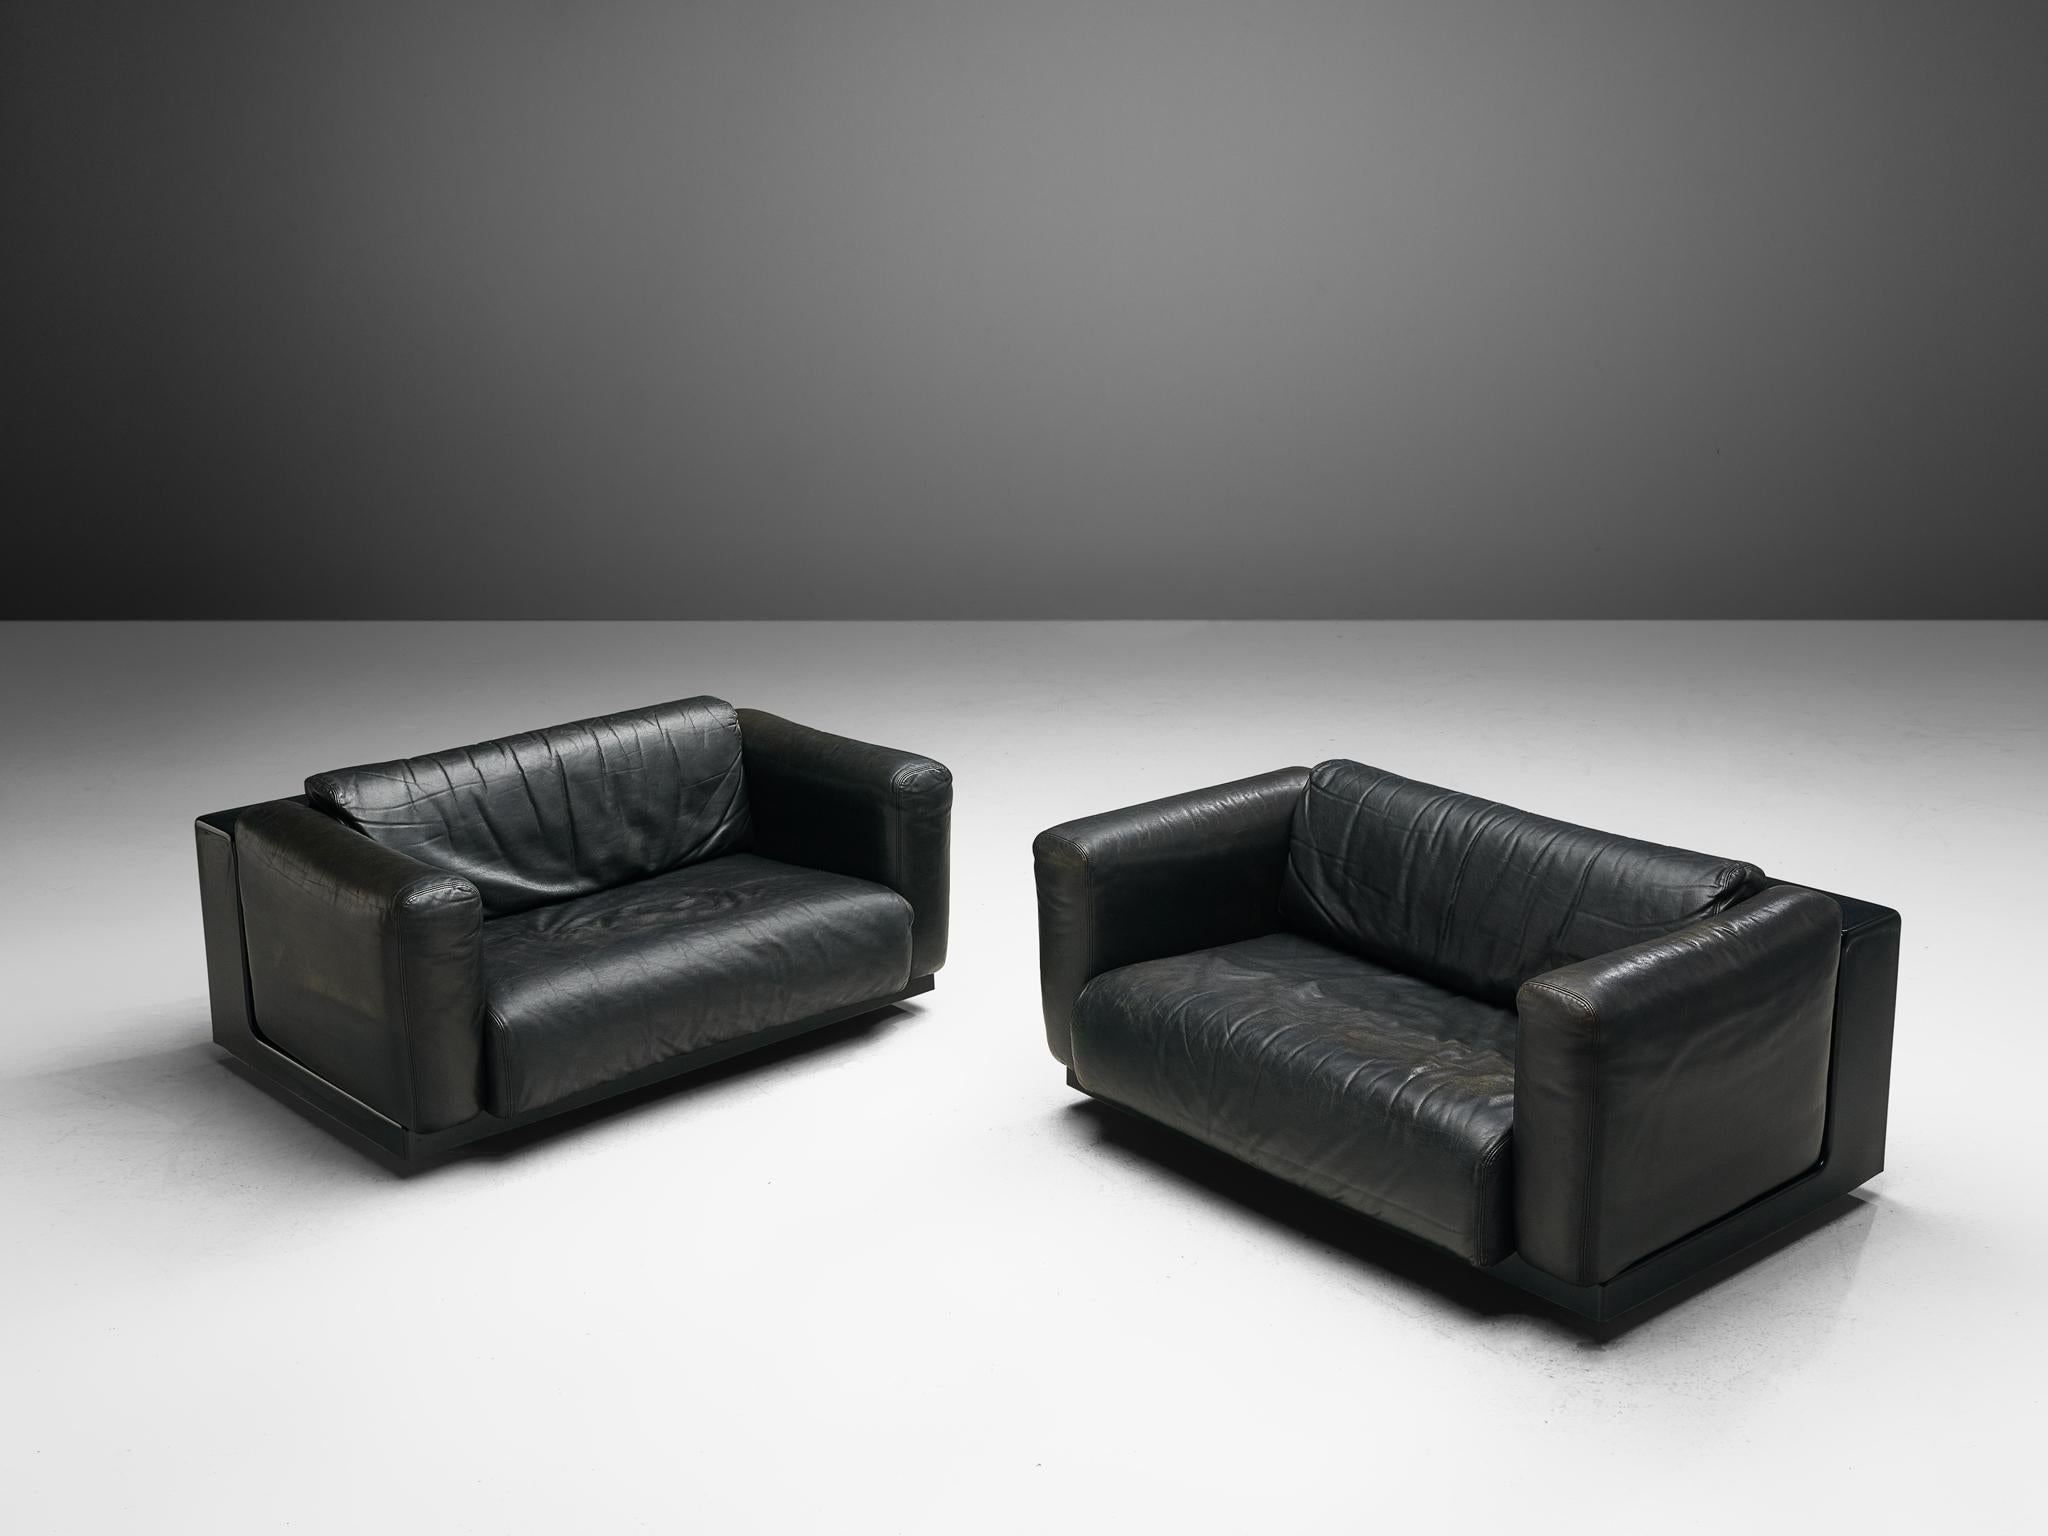 Cini Boeri for Knoll Pair of Love Seats in Black Leather 1